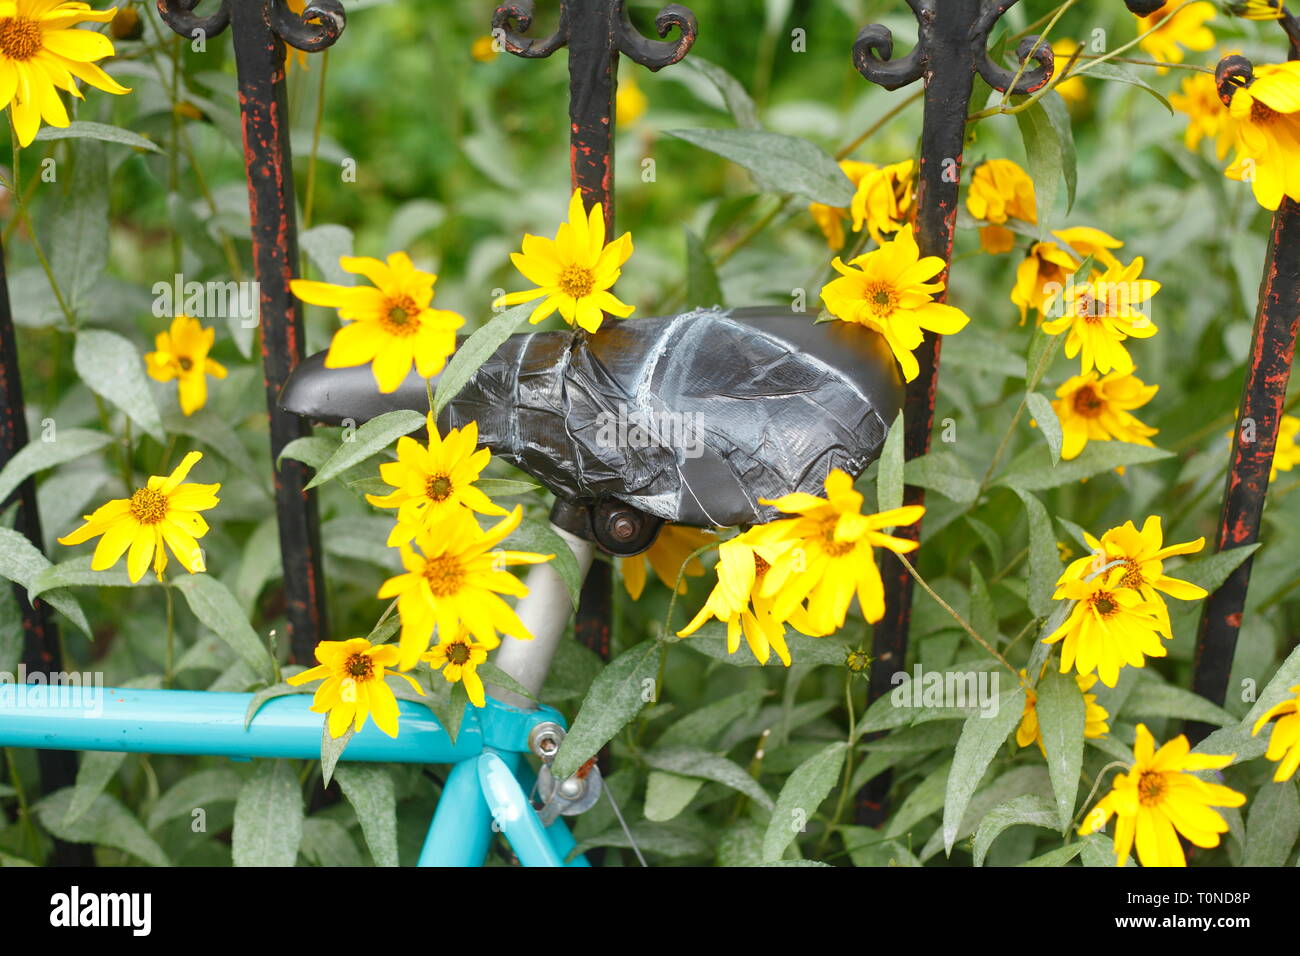 Bicycle saddle, garden fence and blooming yellow sun hat, flowers, Germany Stock Photo